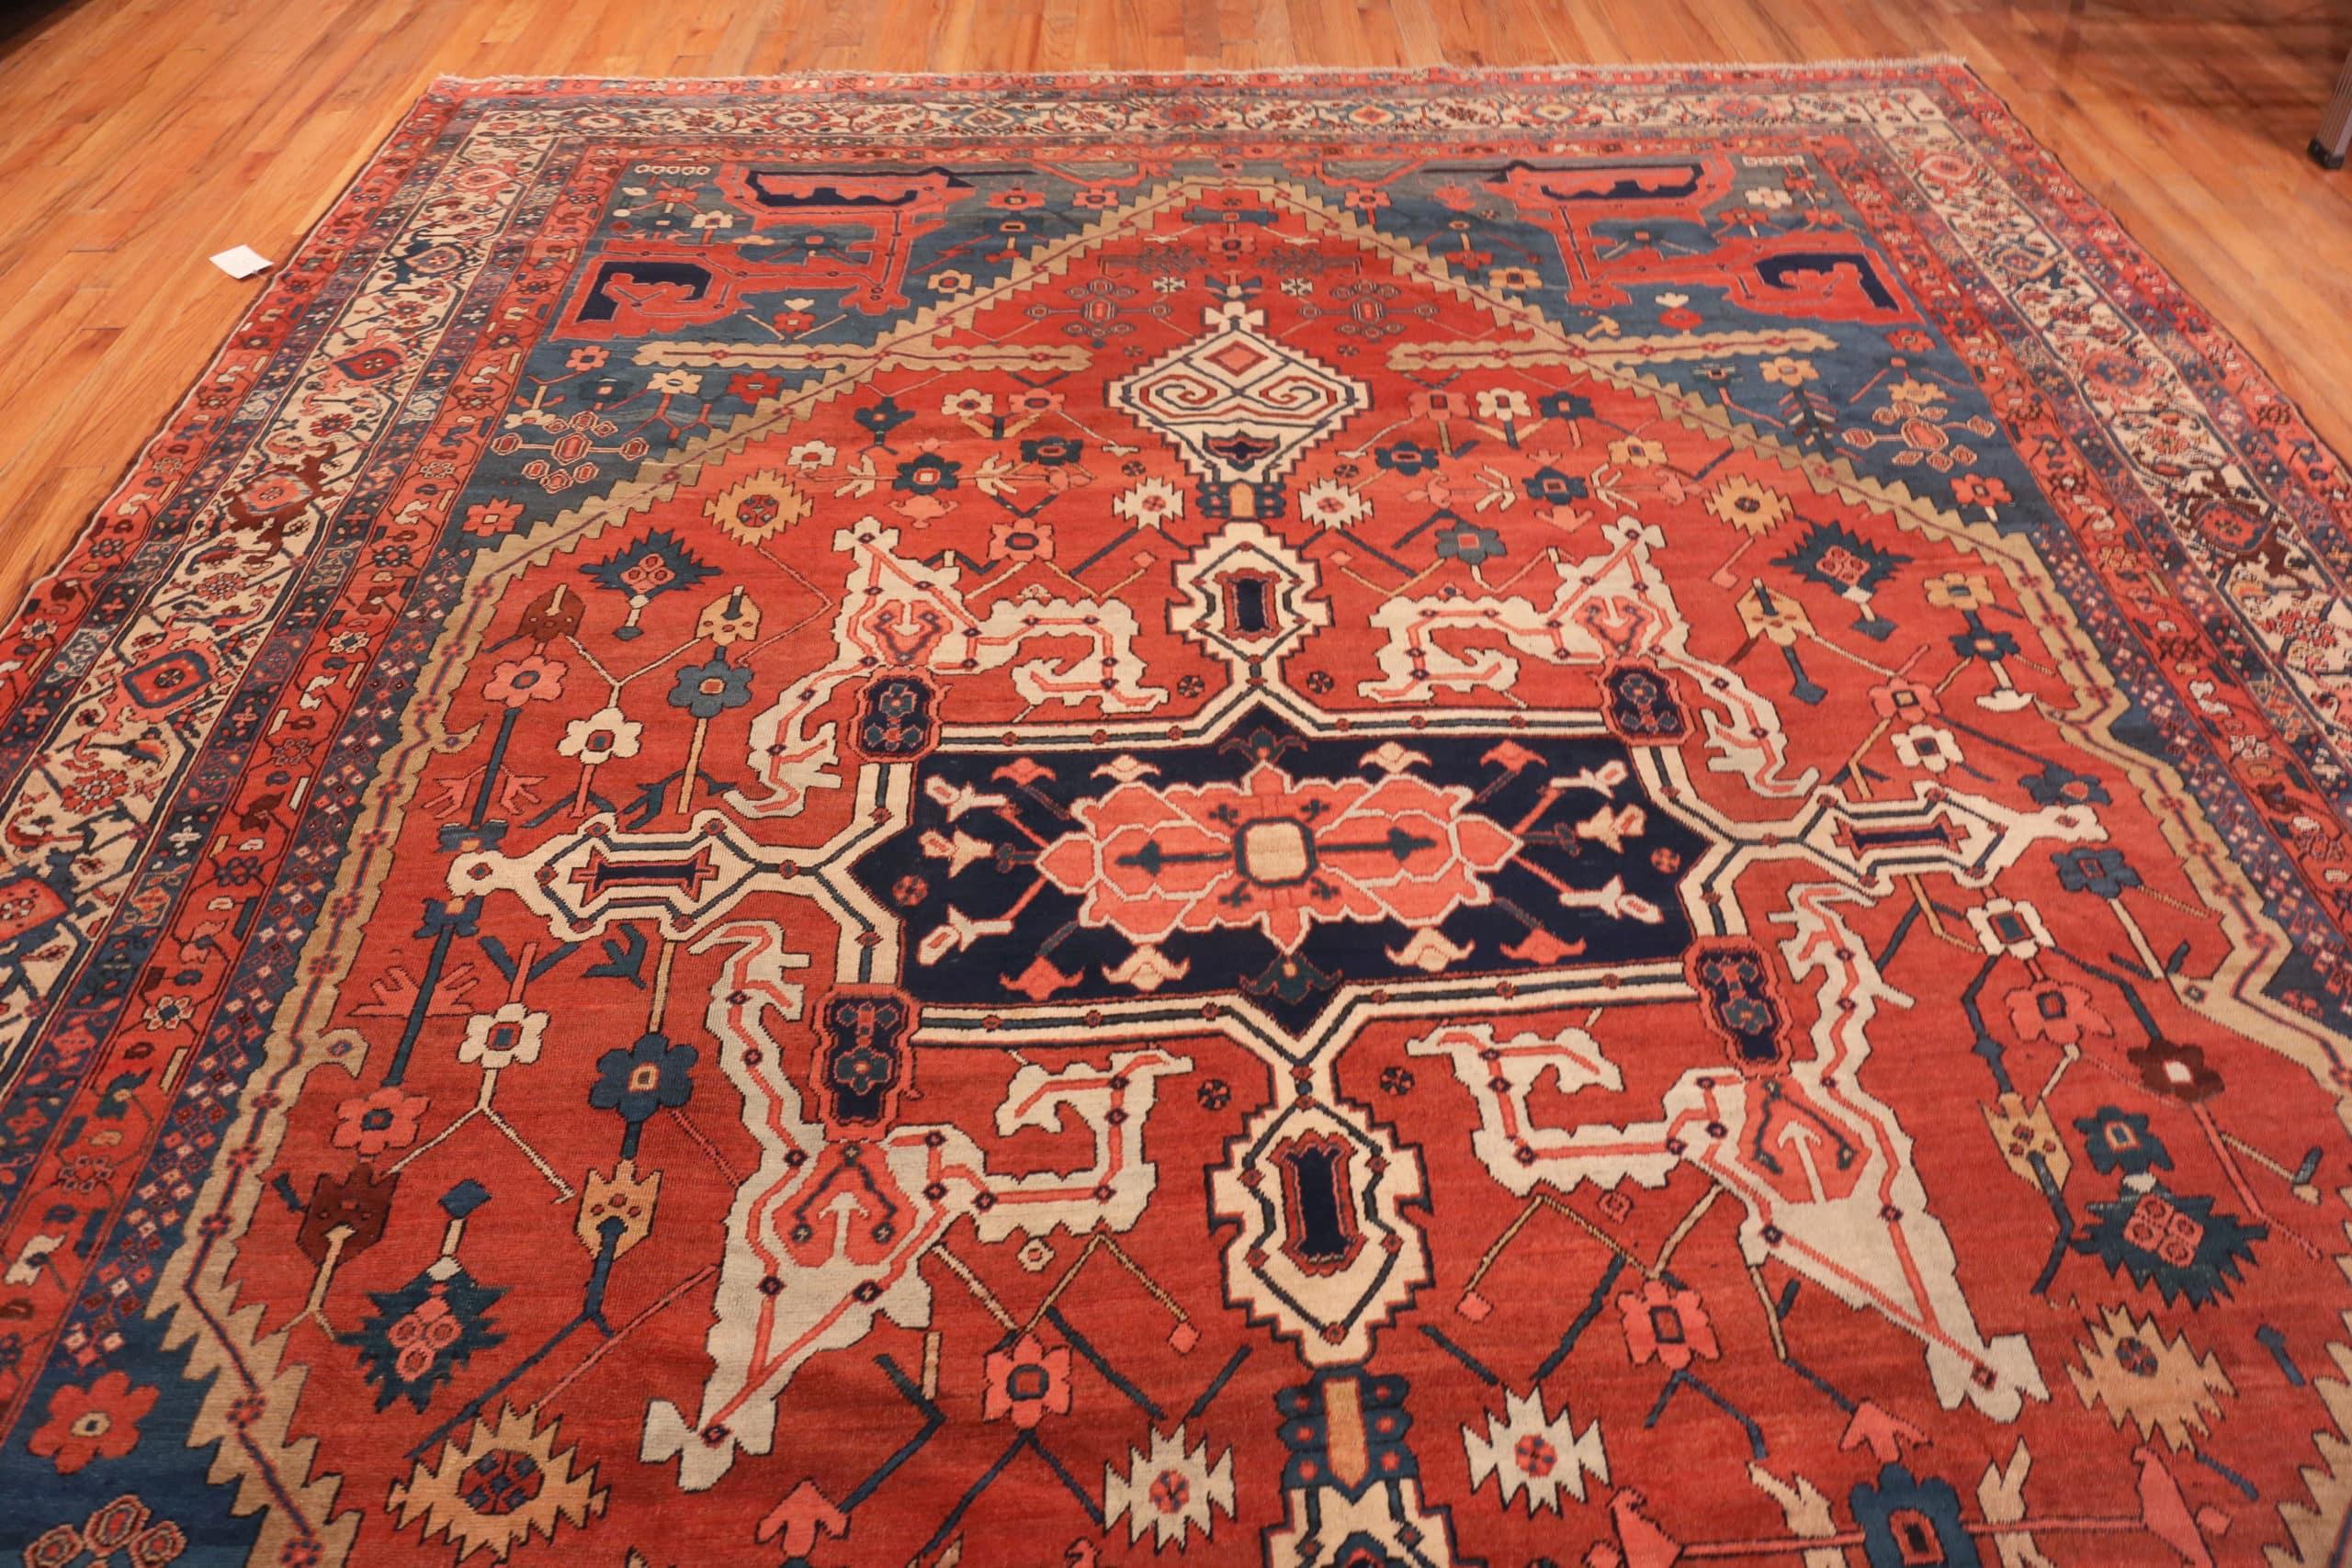 19th Century Nazmiyal Collection Antique Persian Serapi Area Rug. 11 ft 4 in x 14 ft 6 in